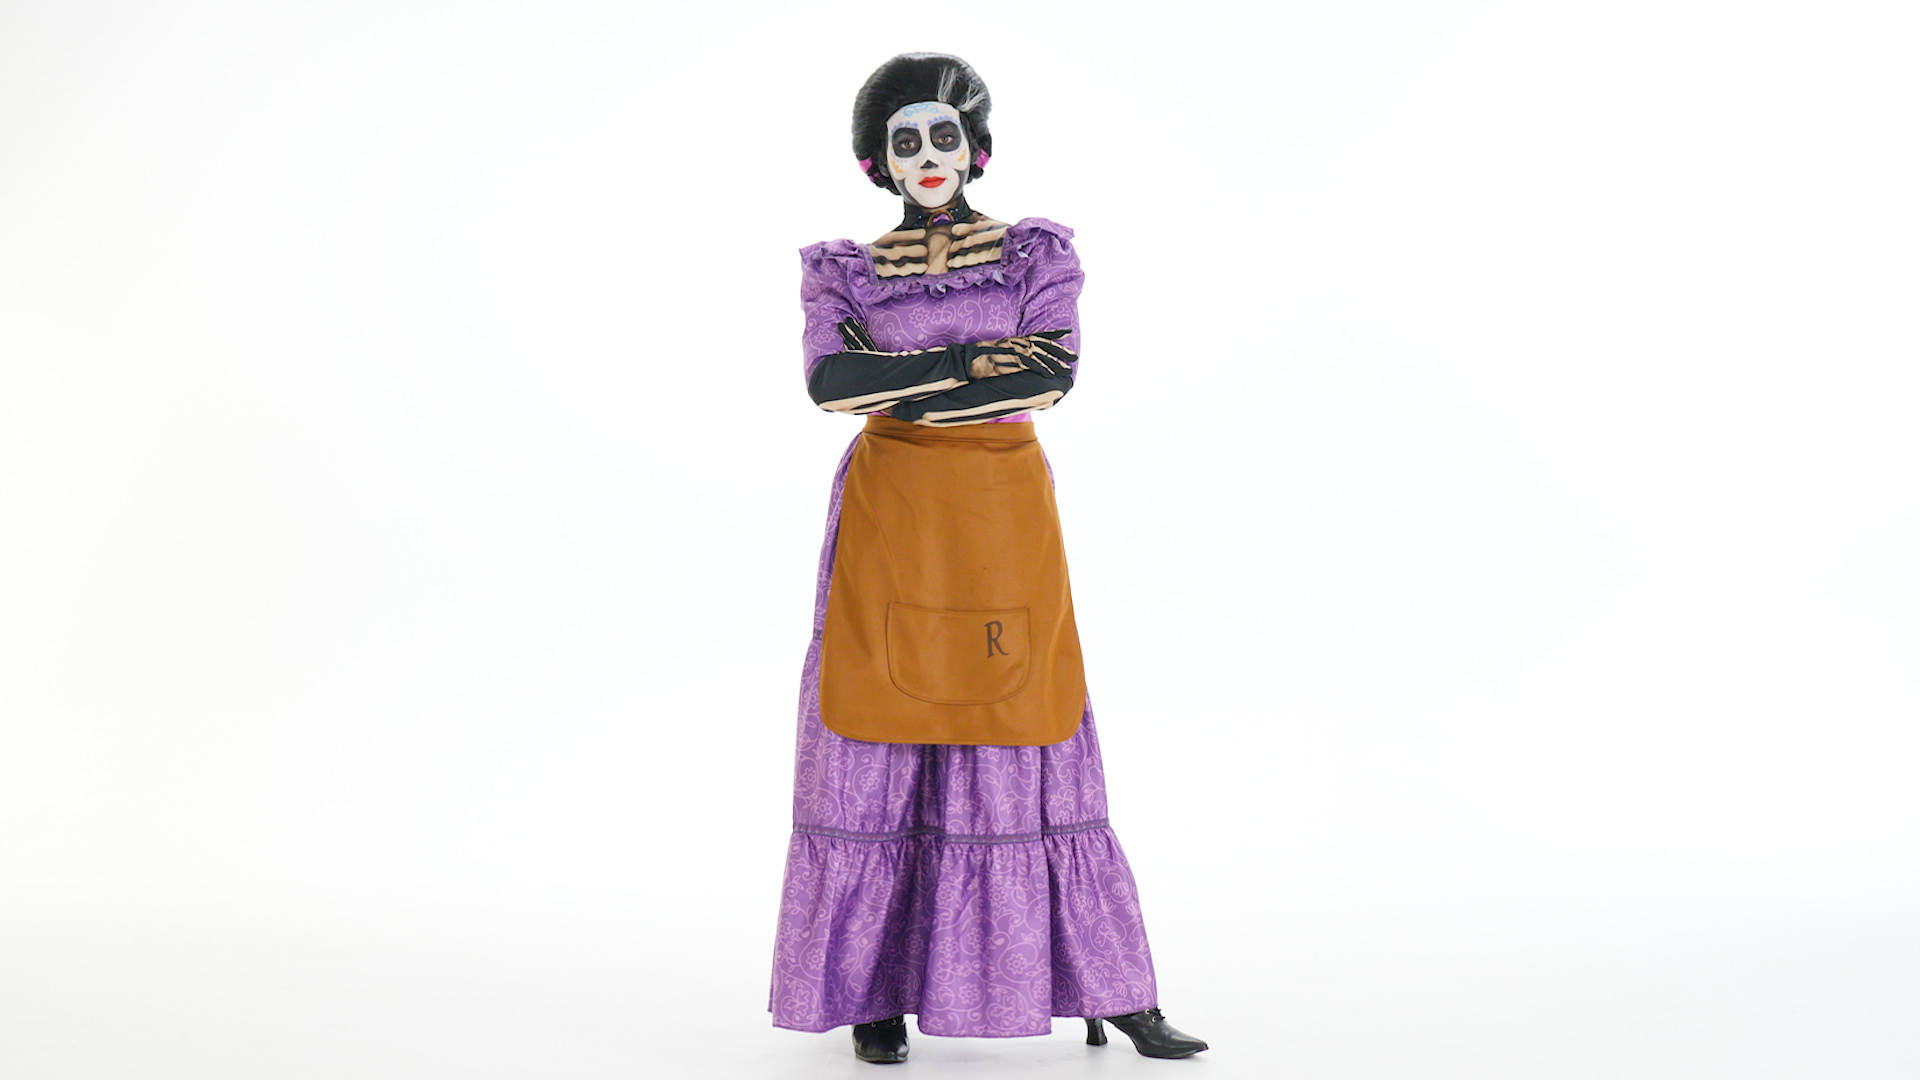 Dress in the Coco Women's Mama Imelda Costume and save Miguel and Hector this Halloween! Celebrate the Day of The Dead in the Coco Women's Mama Imelda Costume!